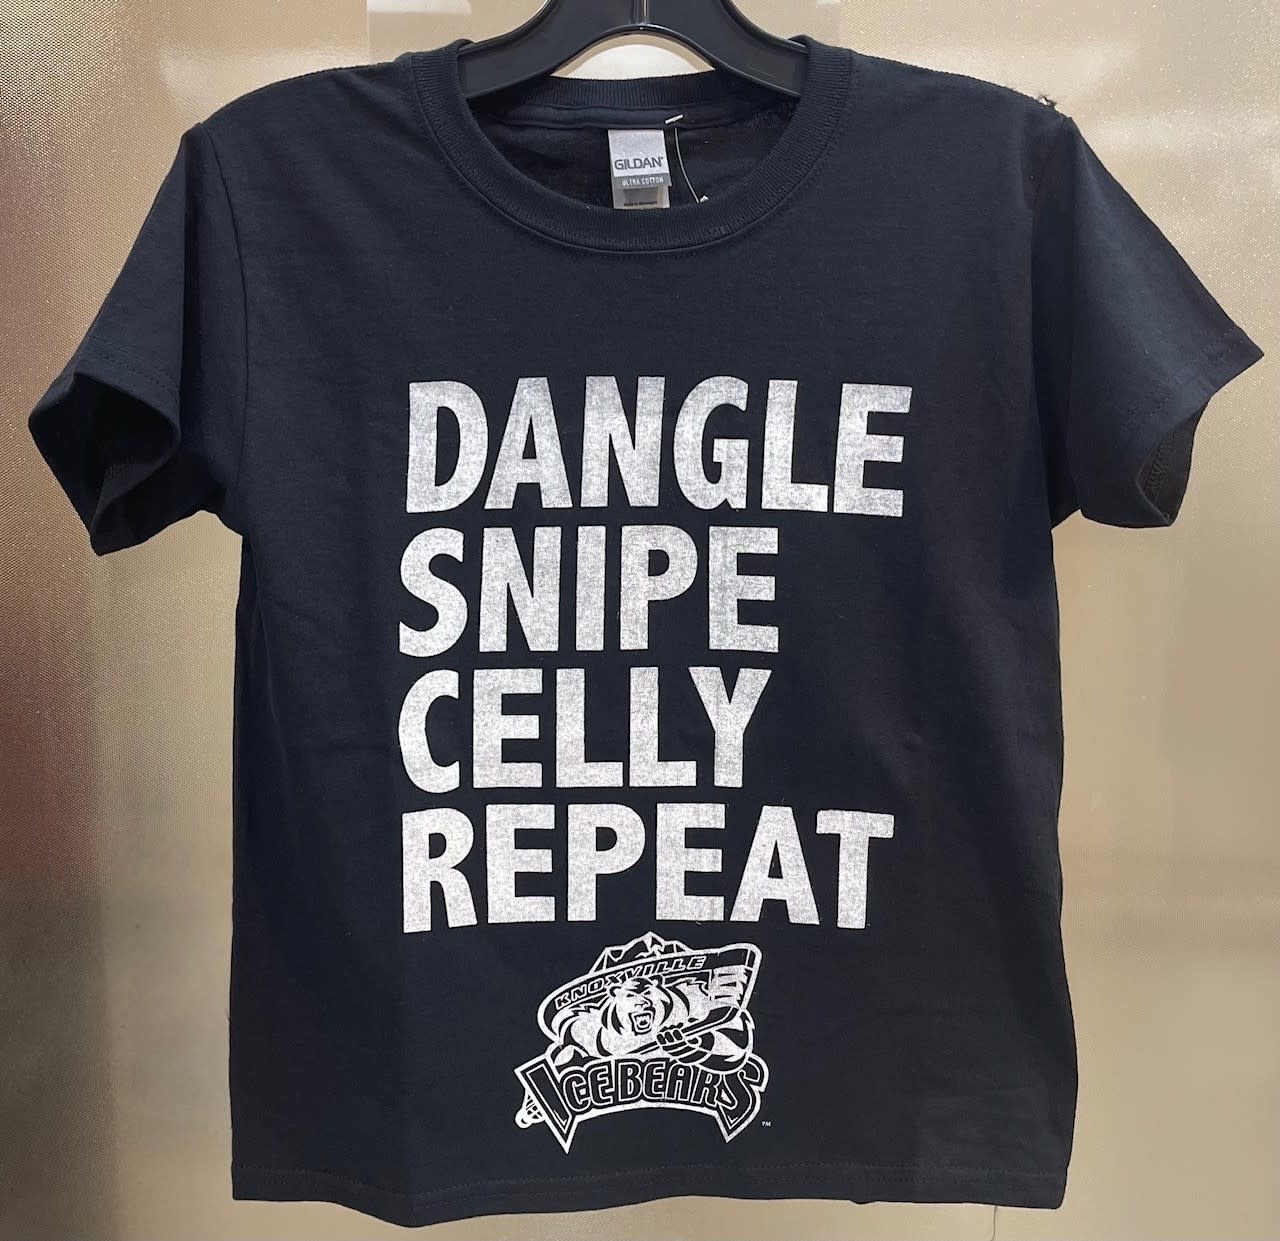 ACME Dangle, Snipe, Cell Youth Black Shirt